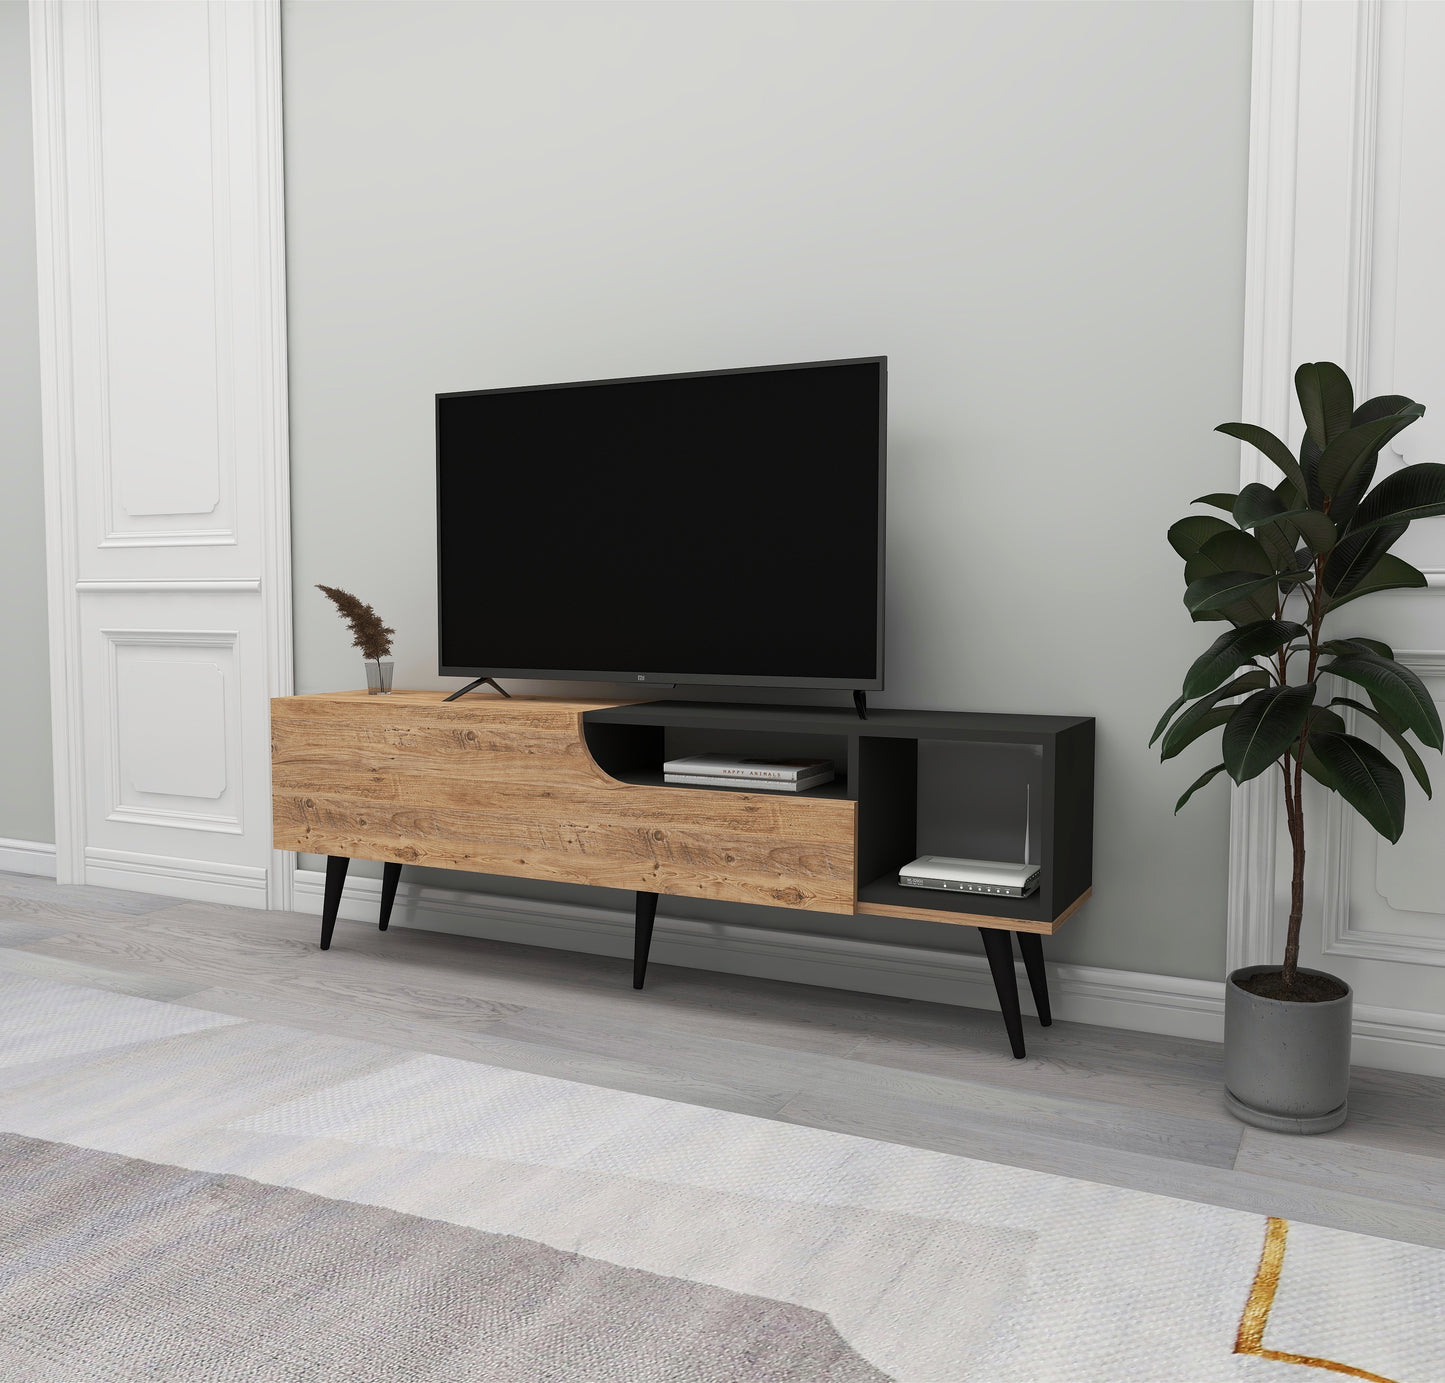 TV Stand, Media Console, TV cabinet, Wooden TV Stand, Media Stand, TV Lowboard, Entertainment Center, Wood TV Unit, TV Board, TV Table, Media Center, Living Room, Furniture